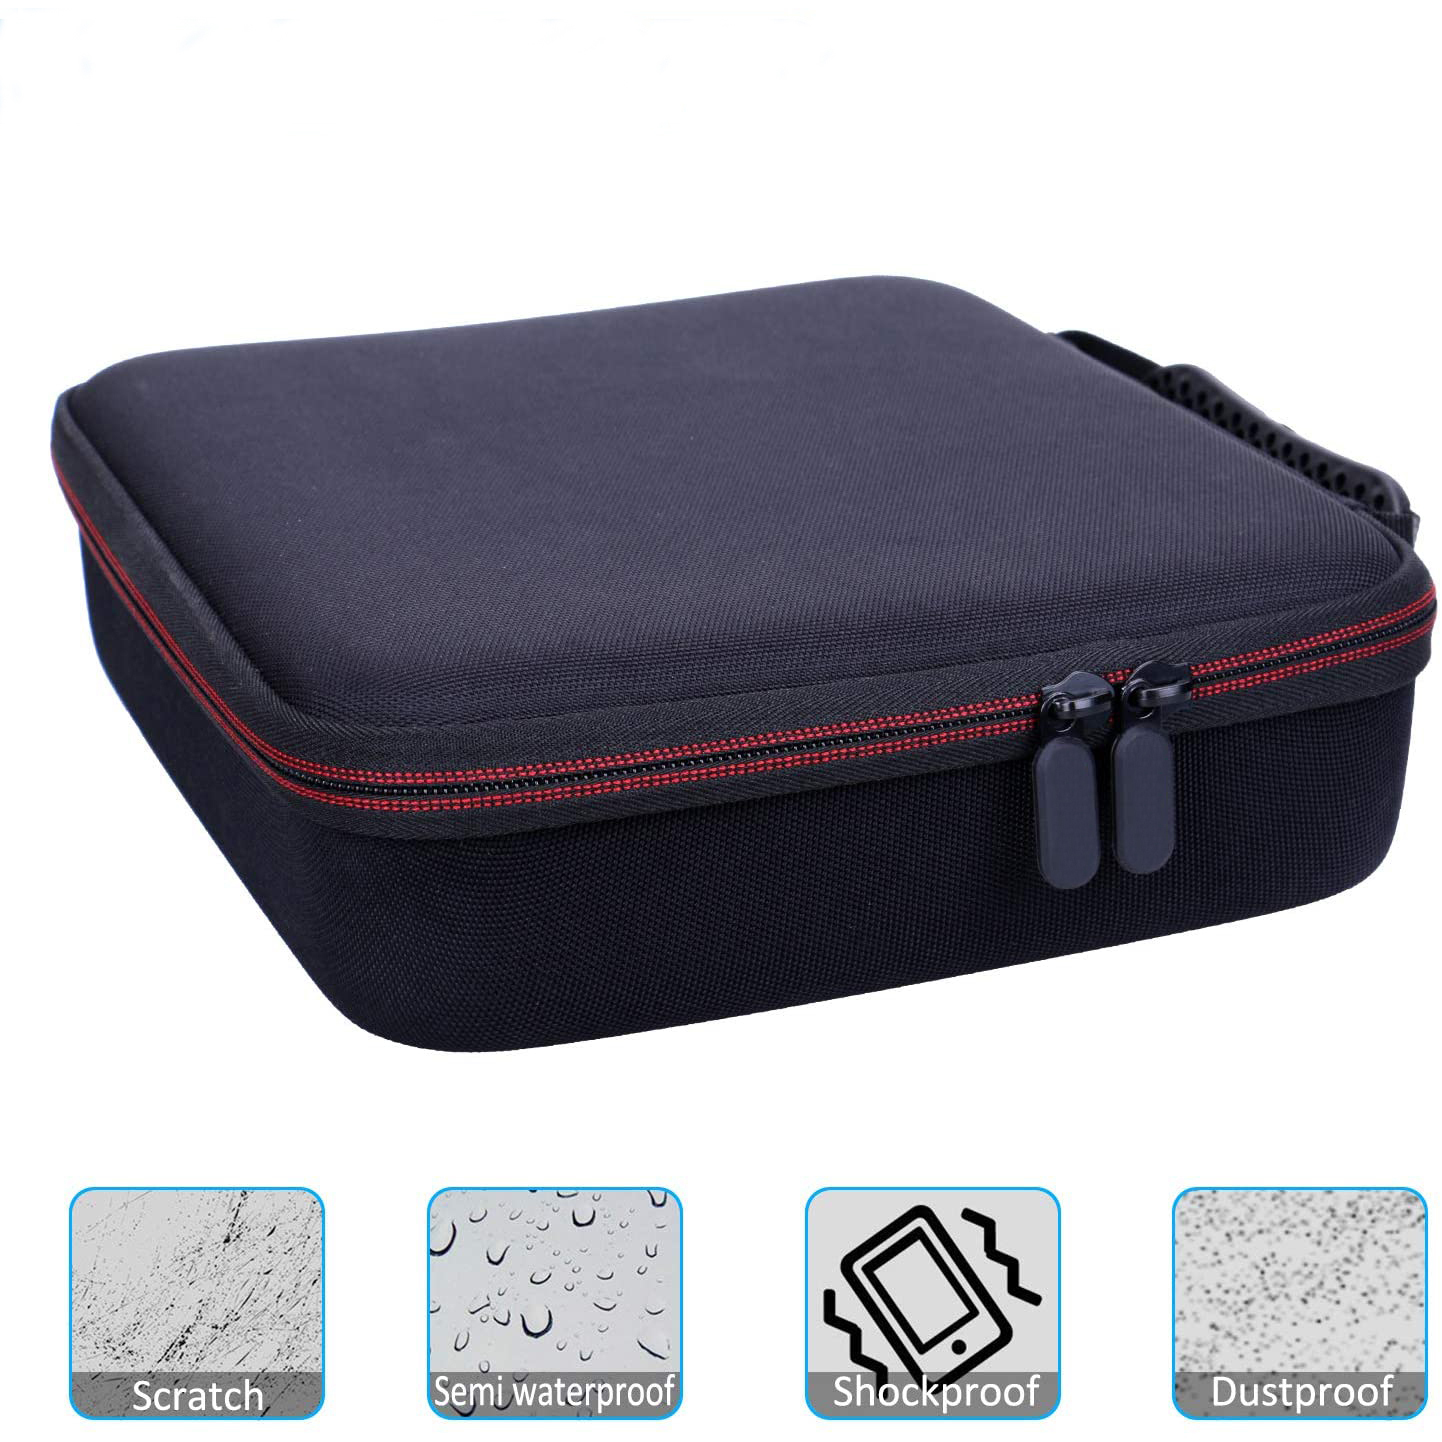 EVA Hard Case with Foam， Hard Sided Camera/Digital Case EVA shockproof Outdoor case，Suitable for storage of drones, digital products, electronic instruments, etc.